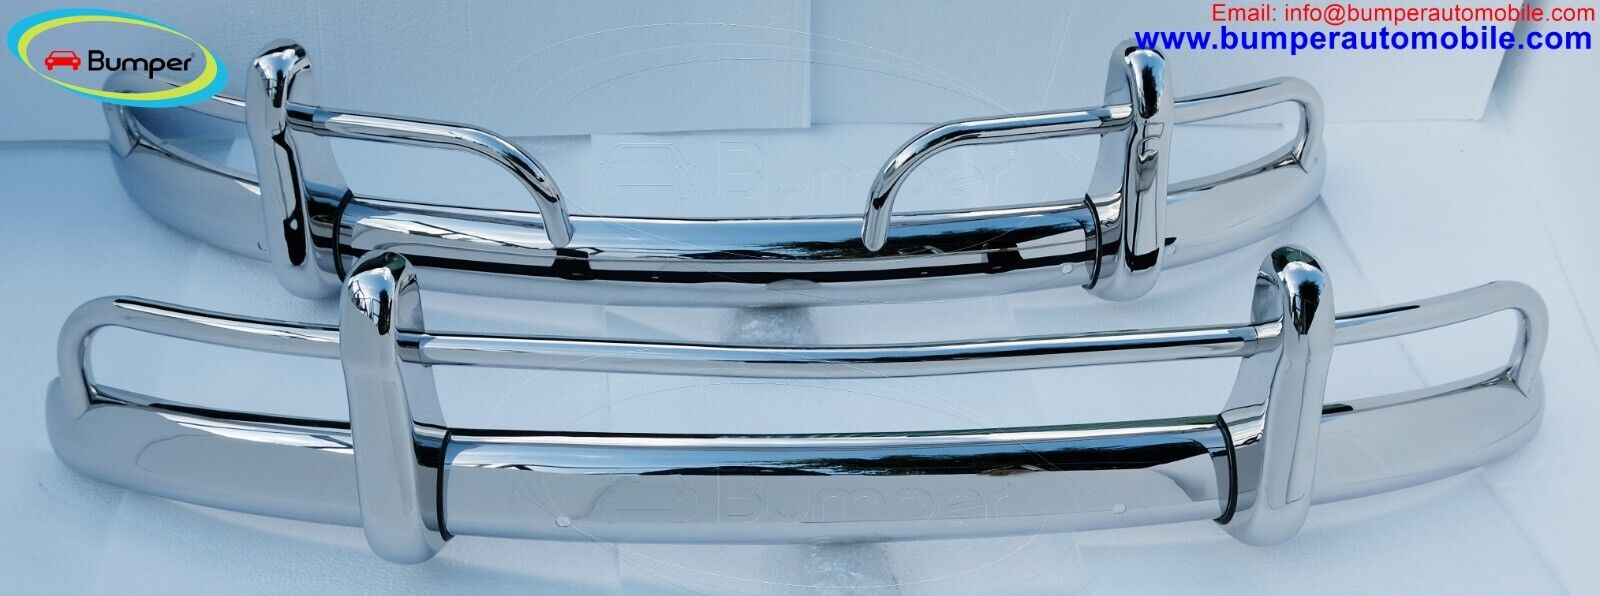 Volkswagen Beetle USA style bumper (1955-1972) polished like chrome new